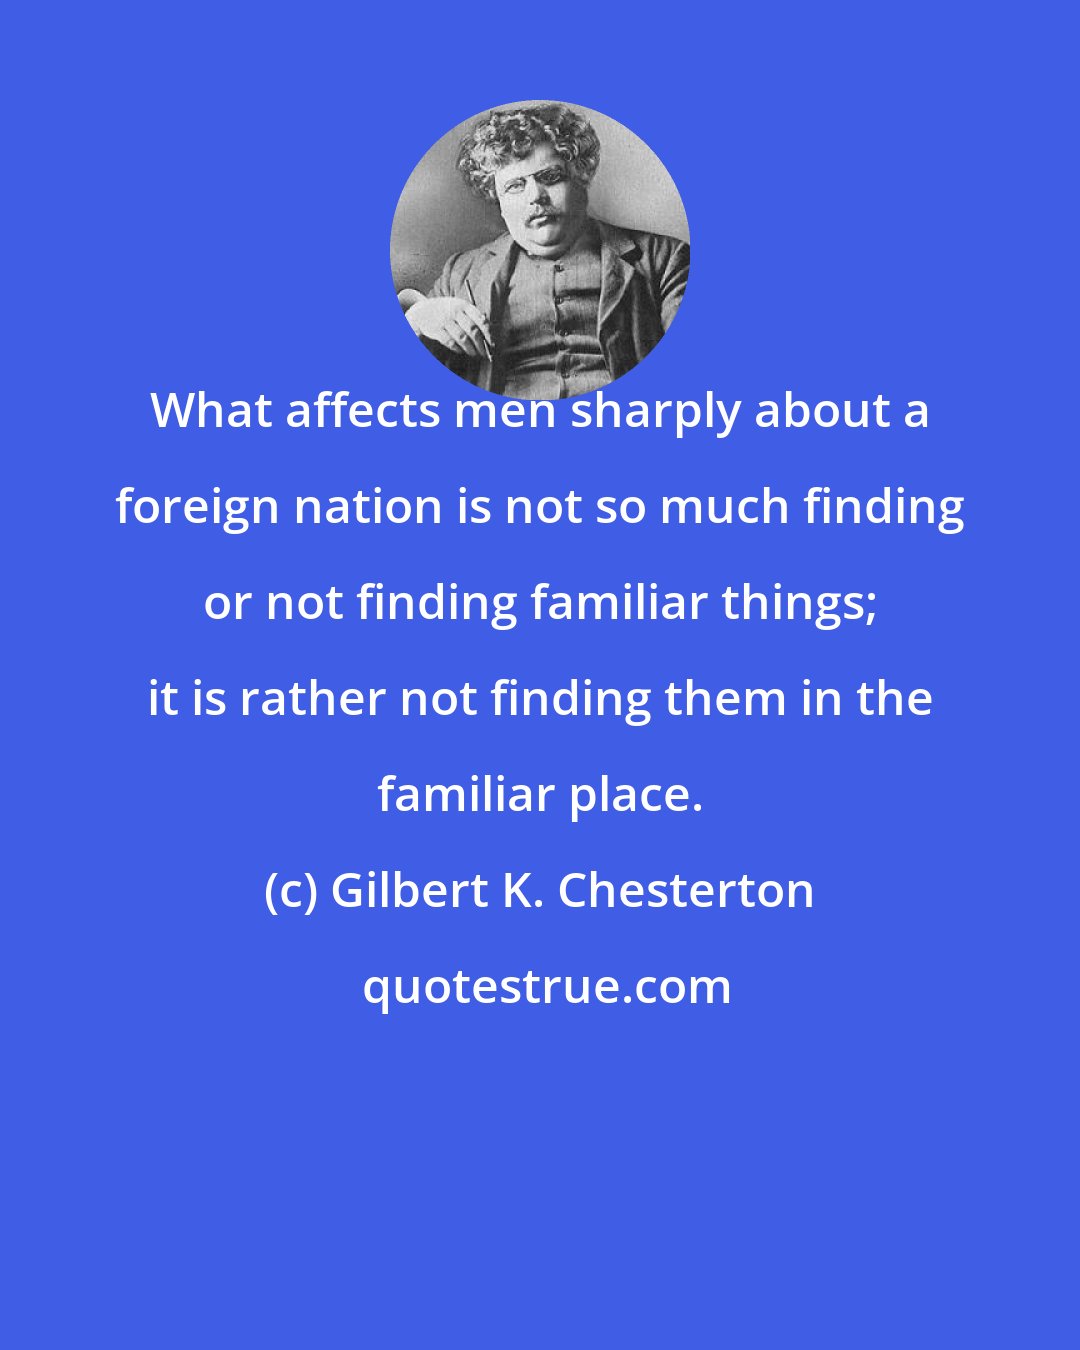 Gilbert K. Chesterton: What affects men sharply about a foreign nation is not so much finding or not finding familiar things; it is rather not finding them in the familiar place.